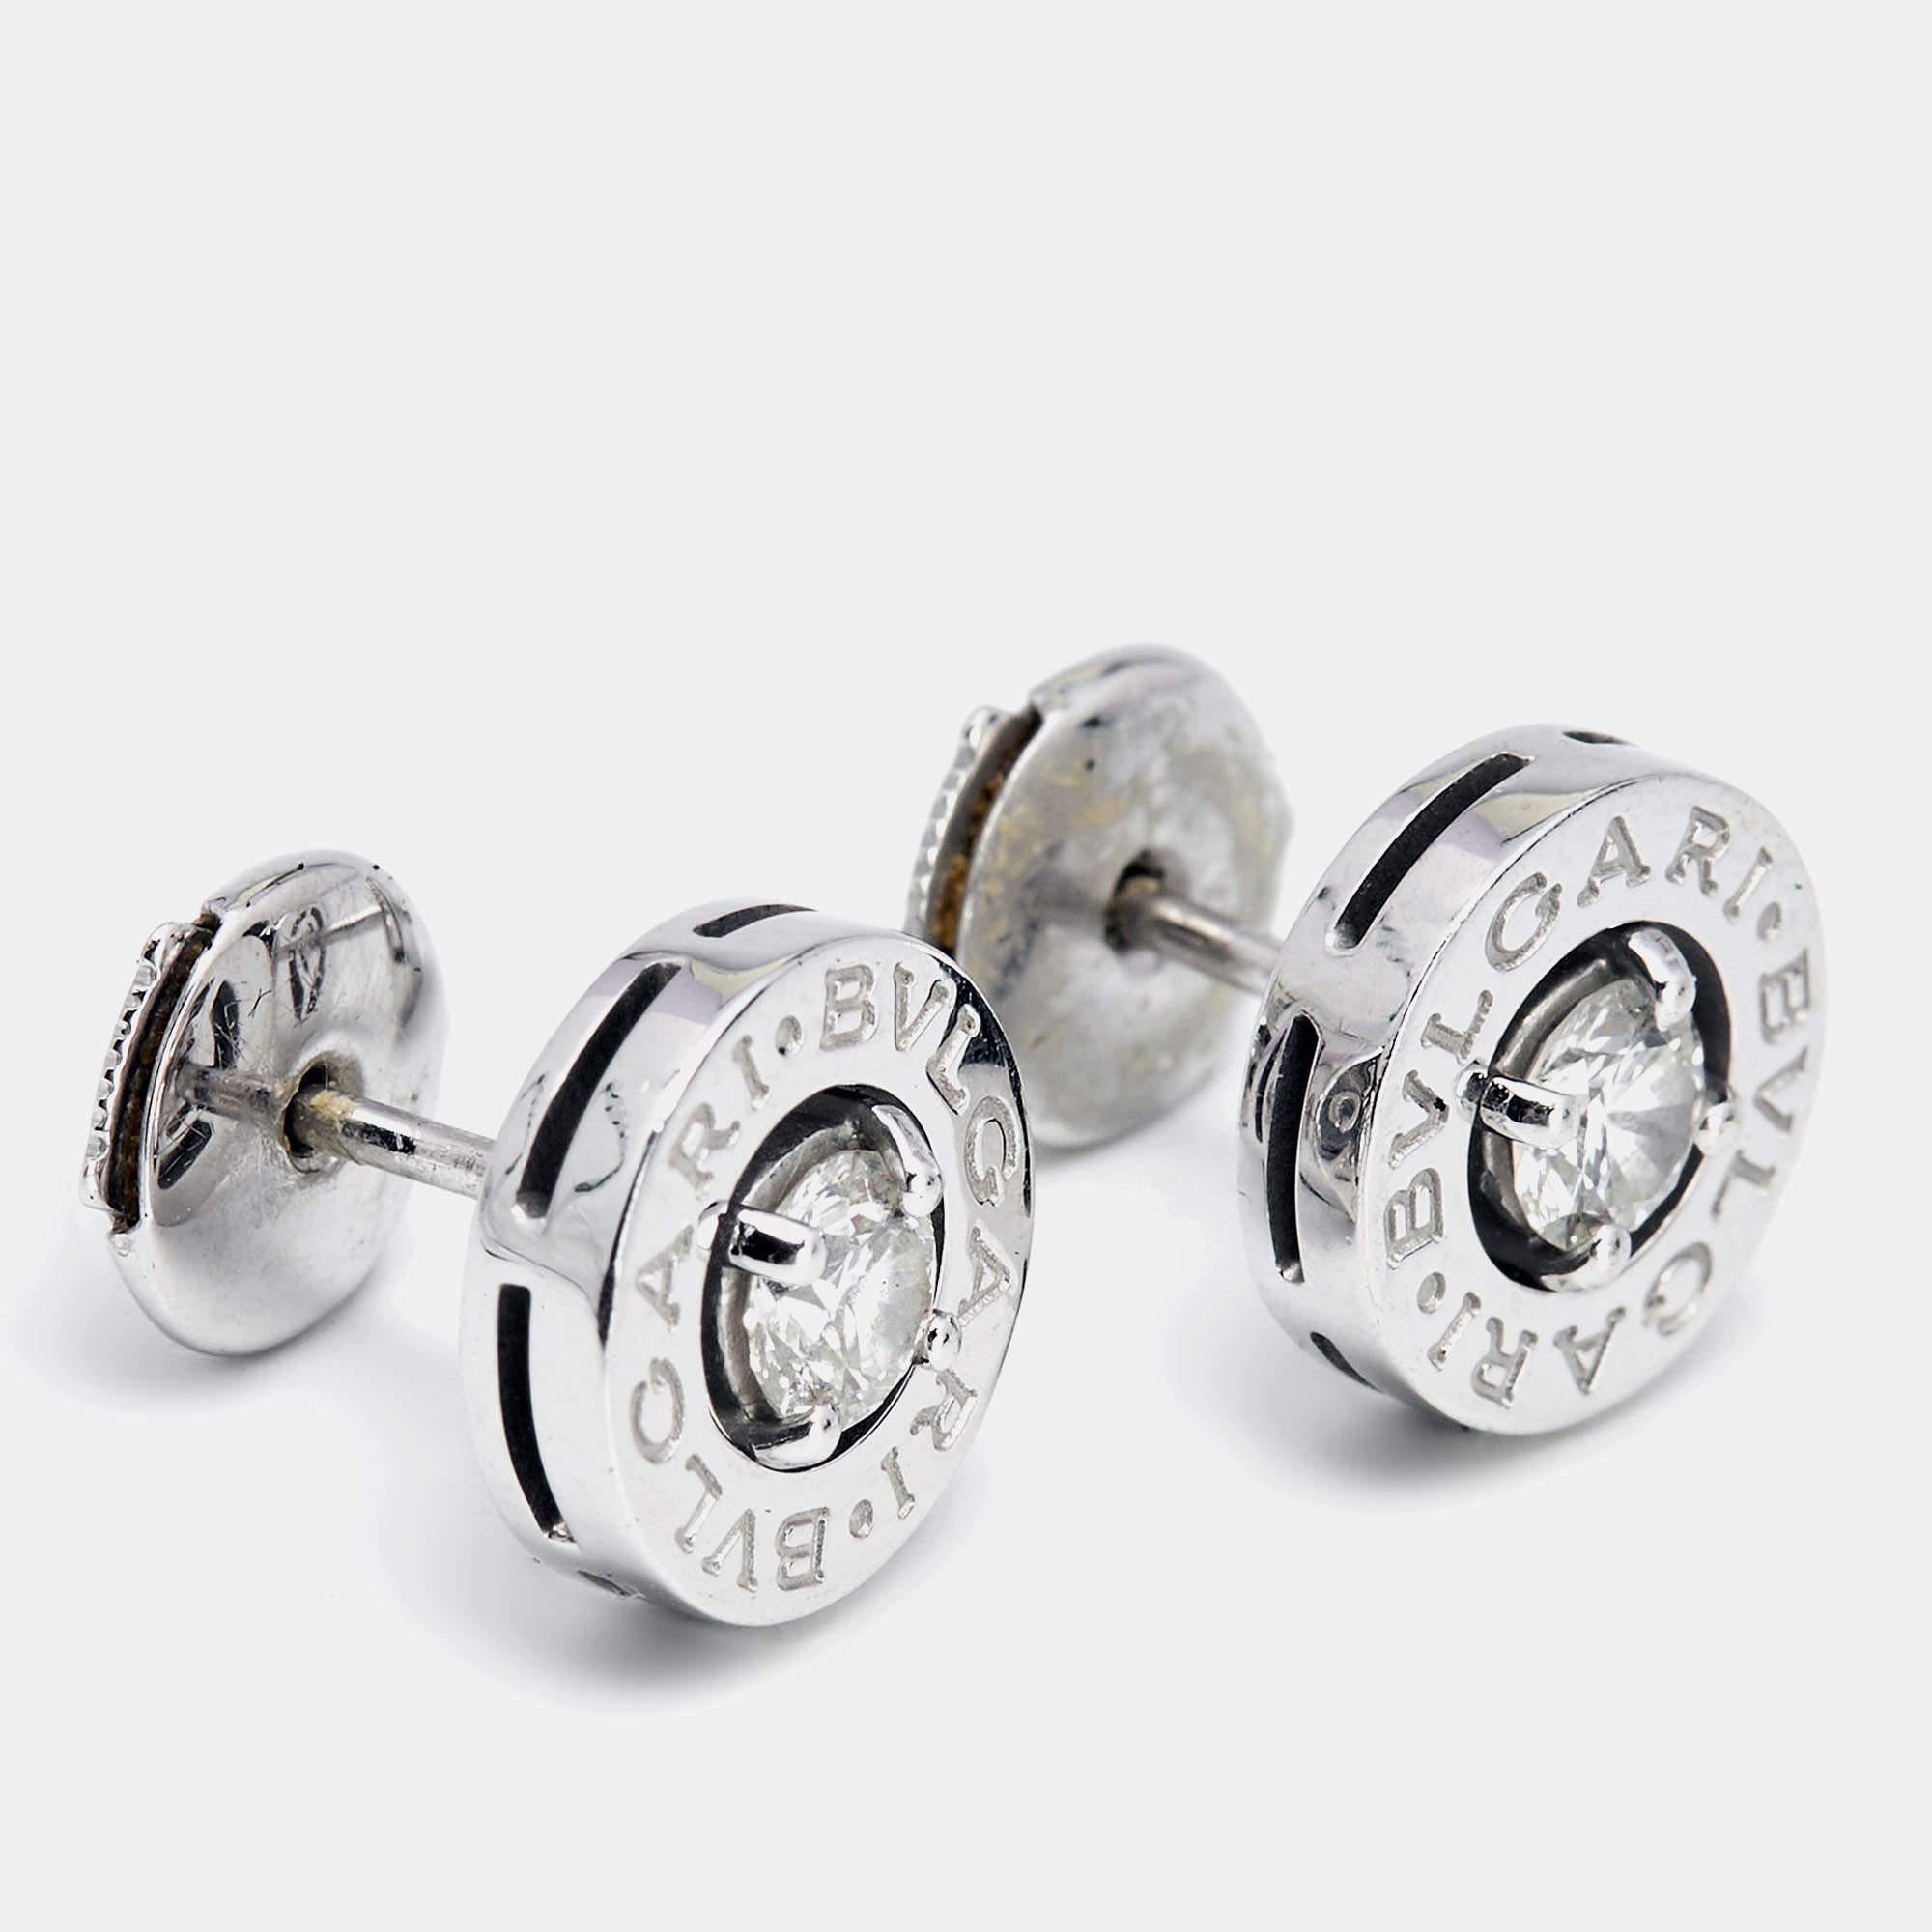 These precious earrings from Bvlgari tug at one's heartstrings in the sweetest way. Sculpted from 18k white gold and designed with a single diamond, the pair is lovely. Be sure to try them with swept hair and a matching necklace.

